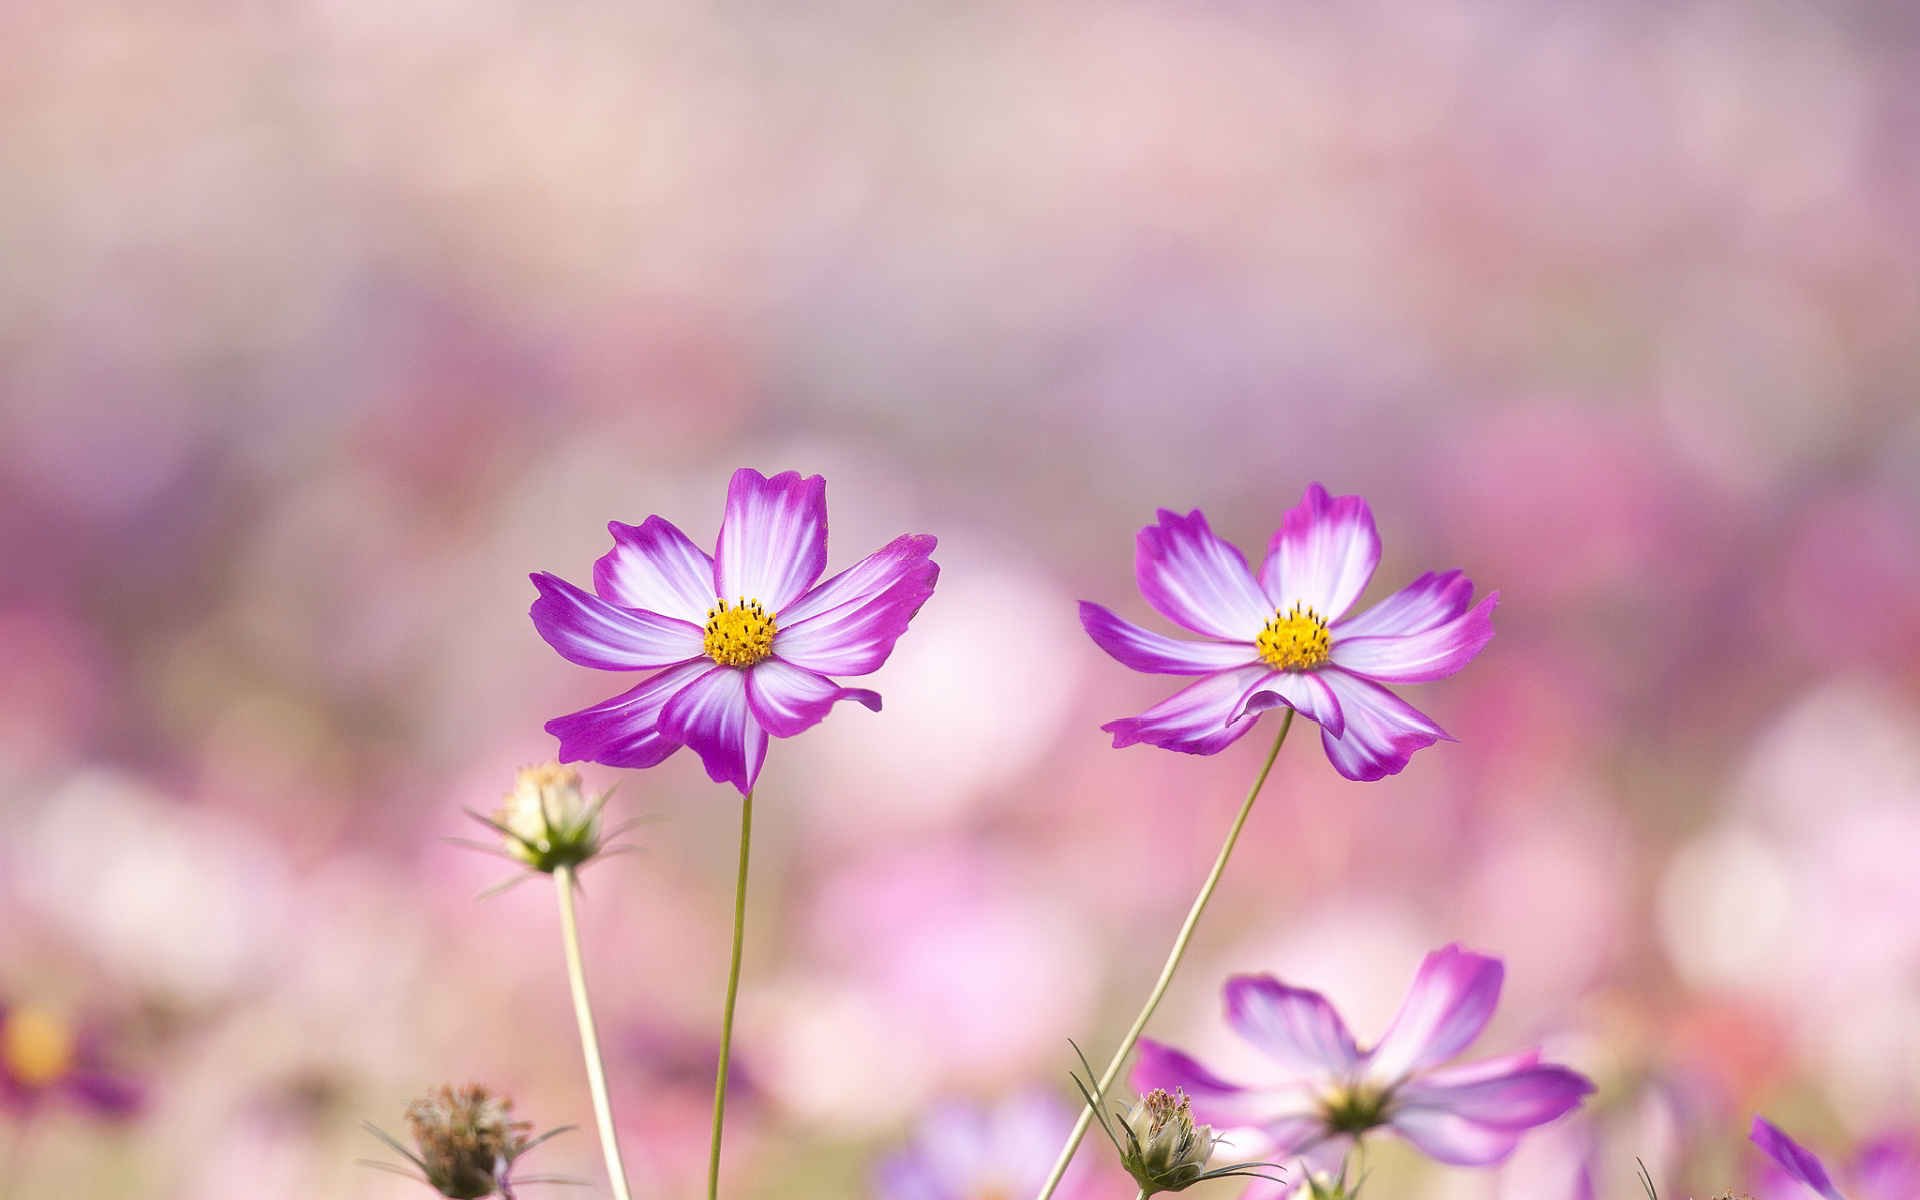 great summer flowers hd image